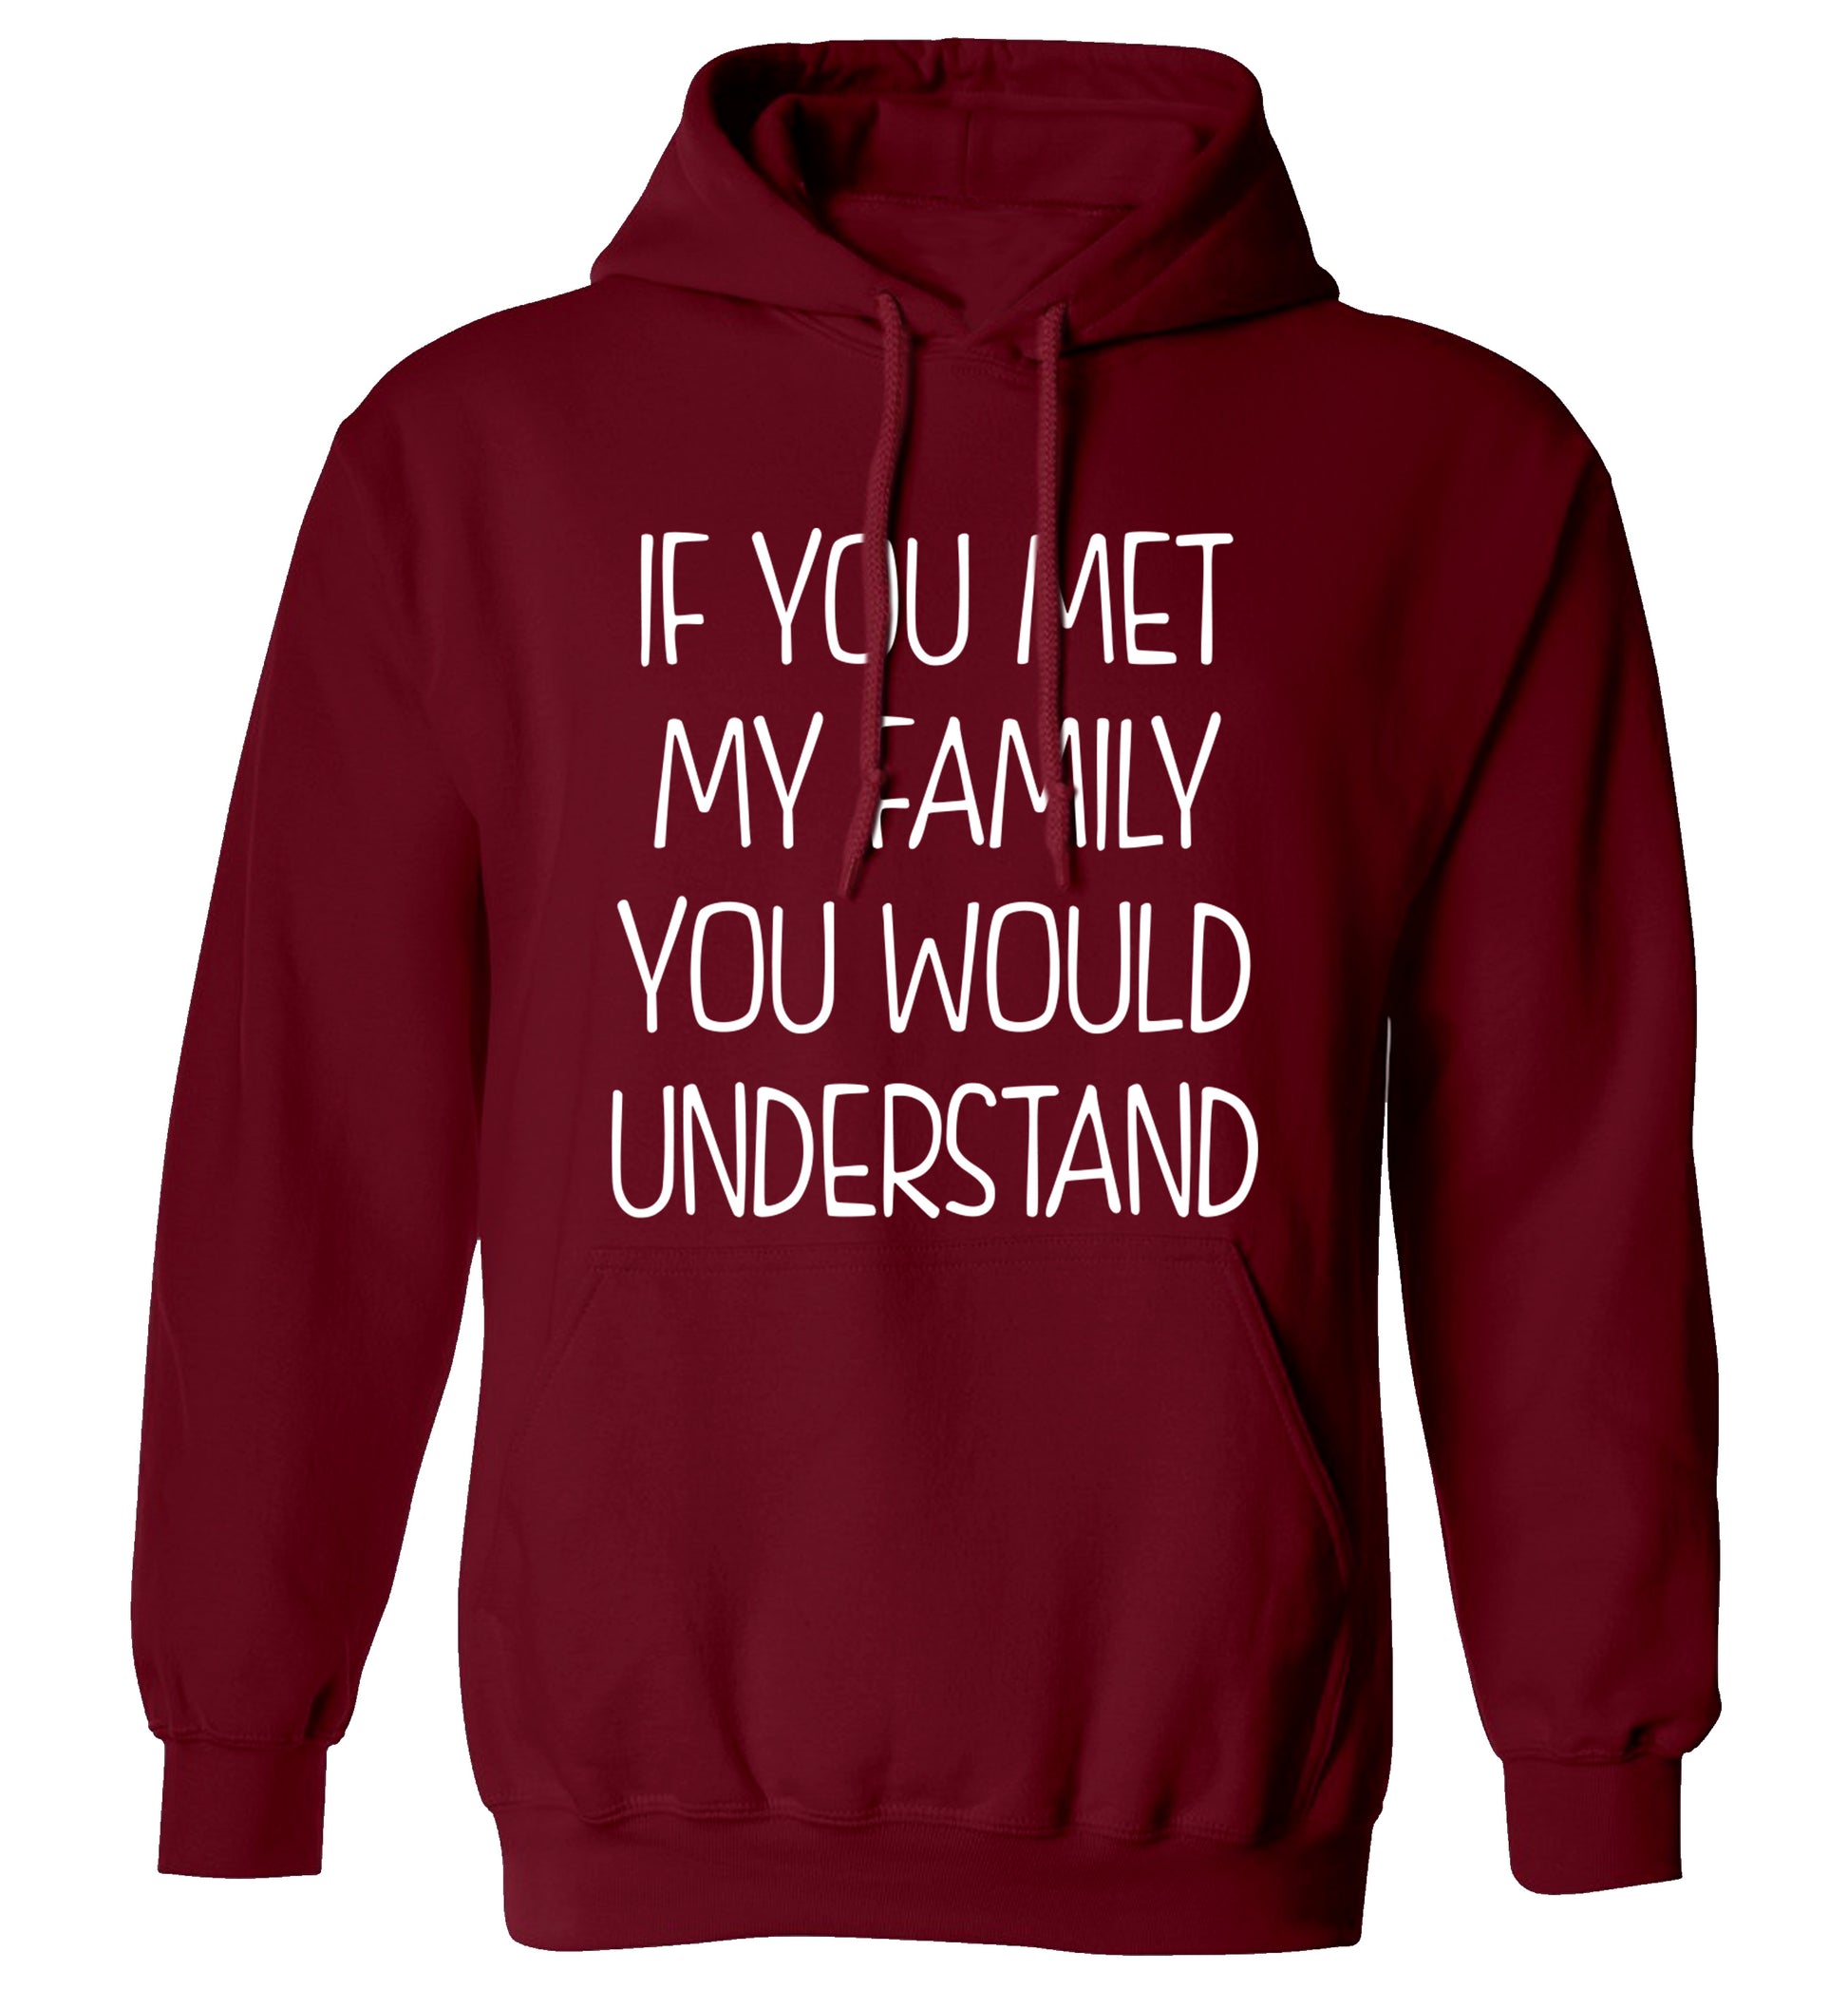 If you met my family you would understand adults unisex maroon hoodie 2XL